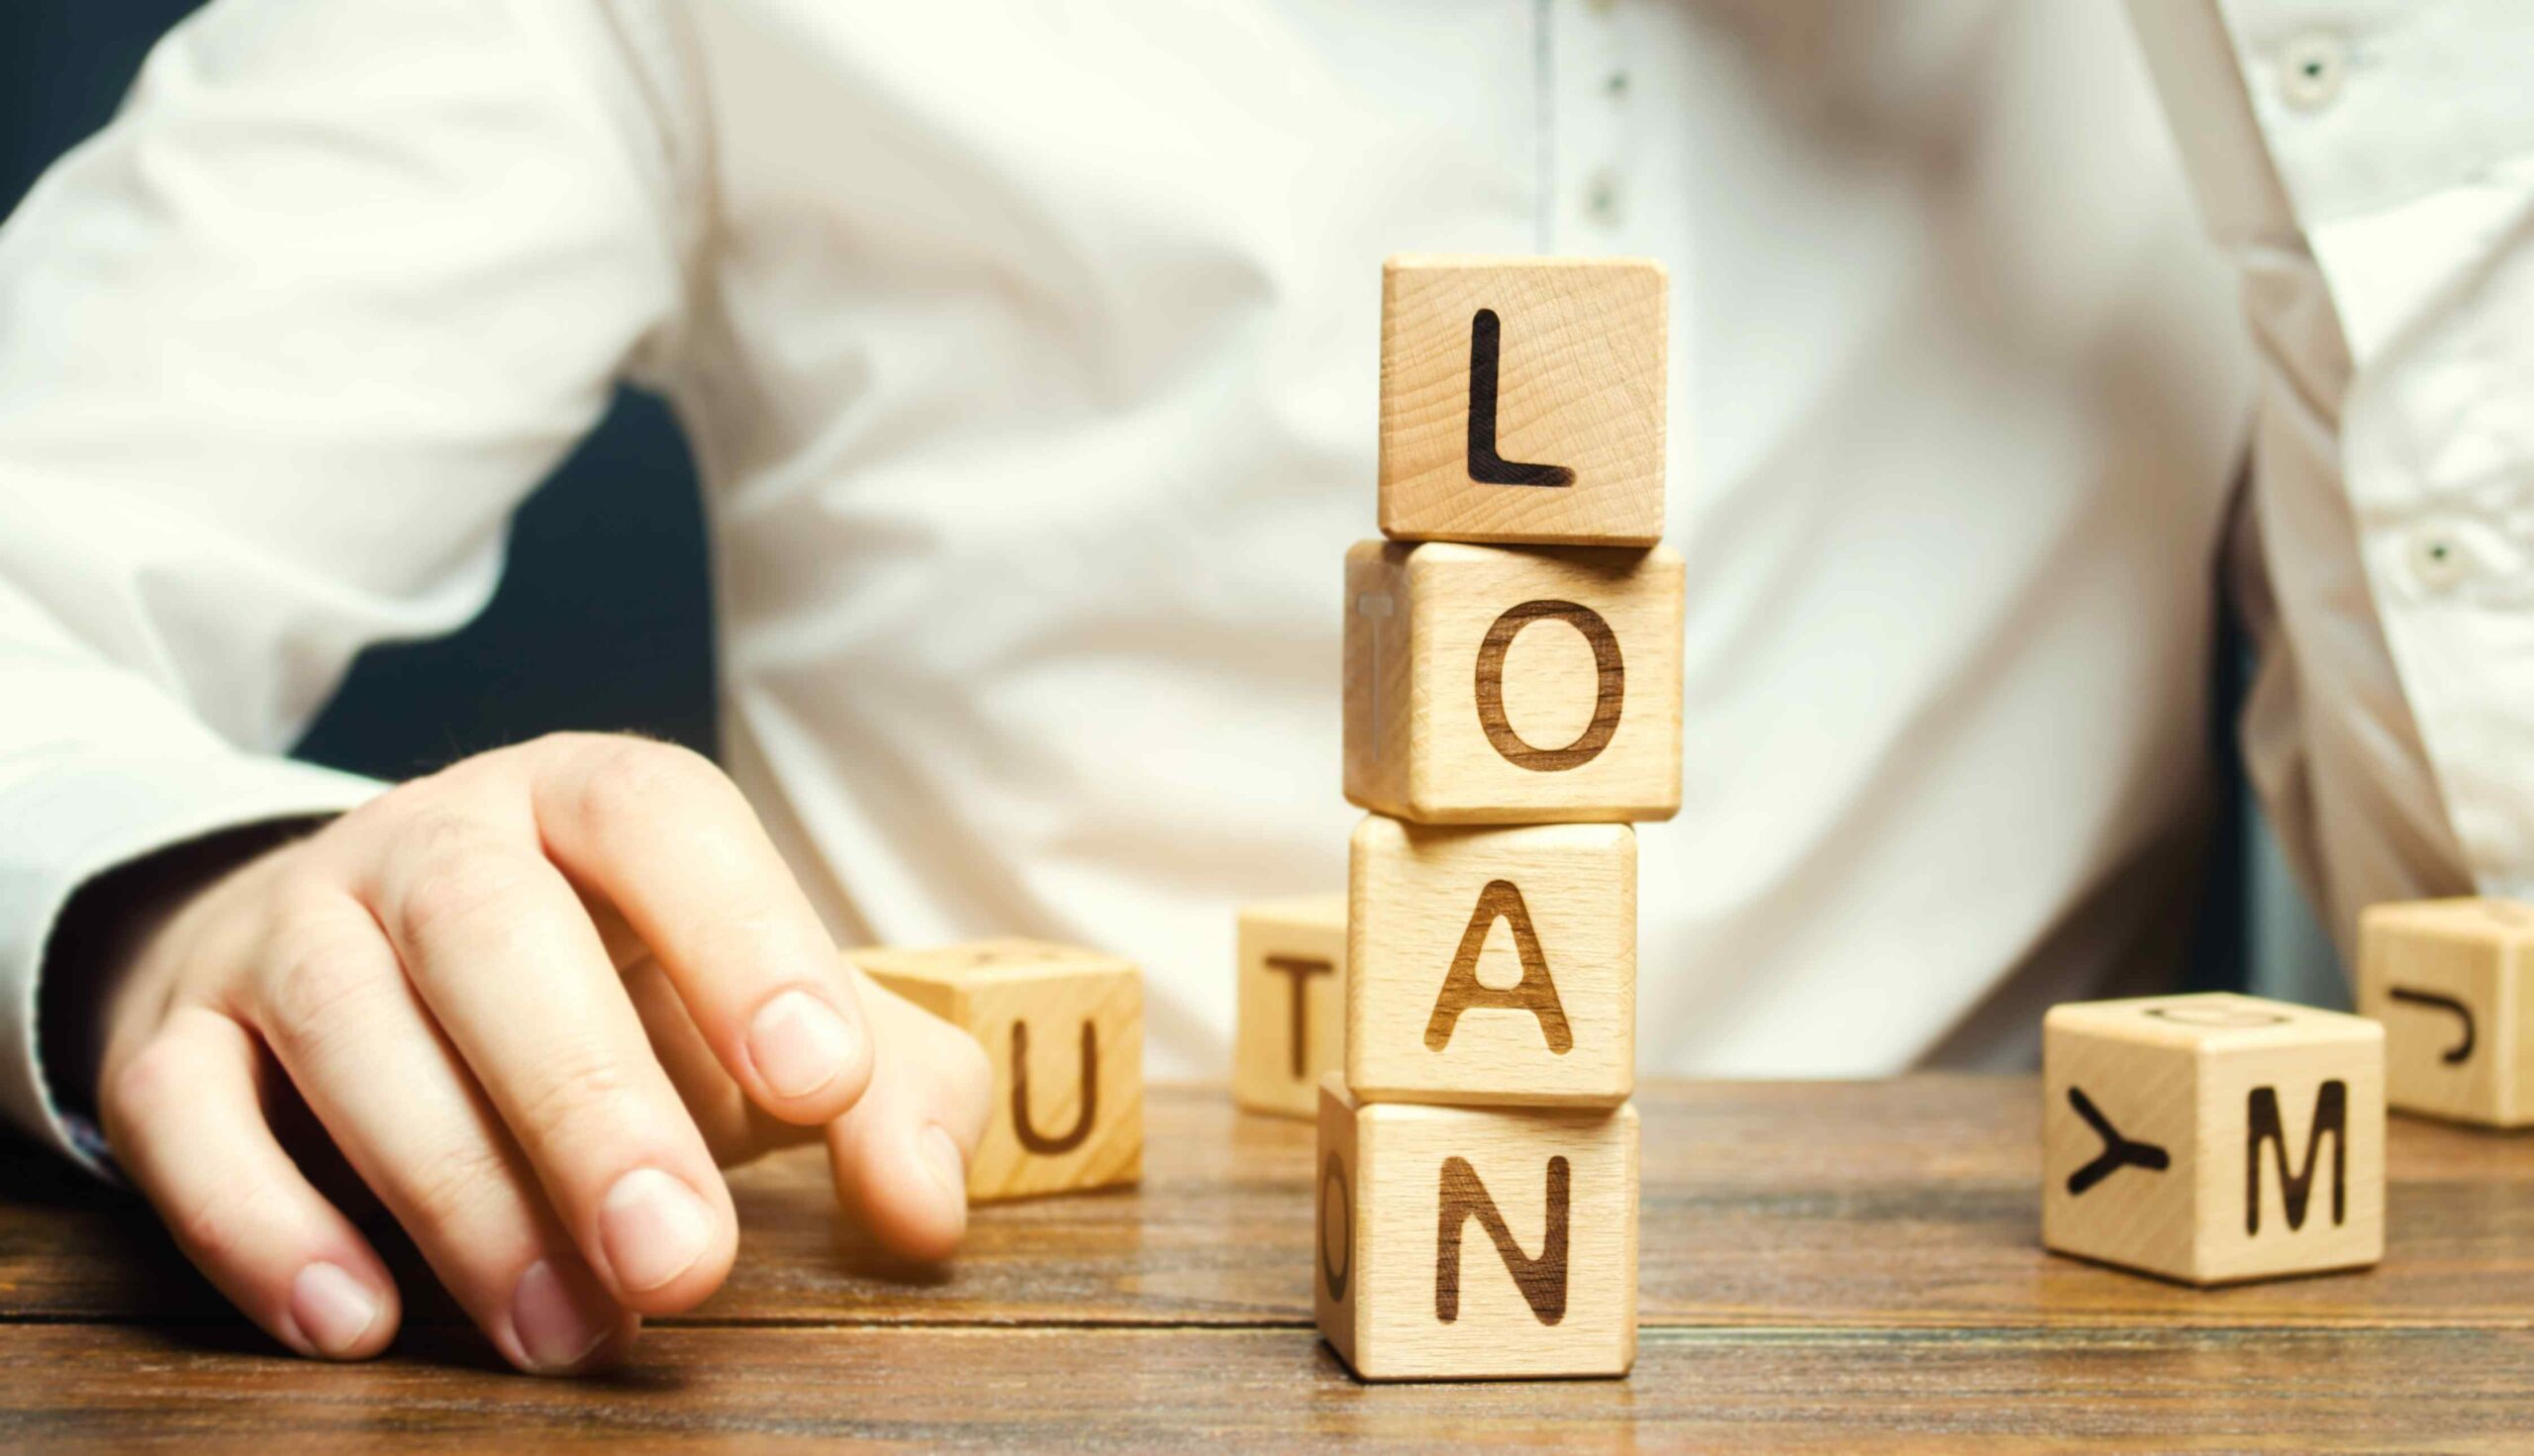 sba loans for small businesses